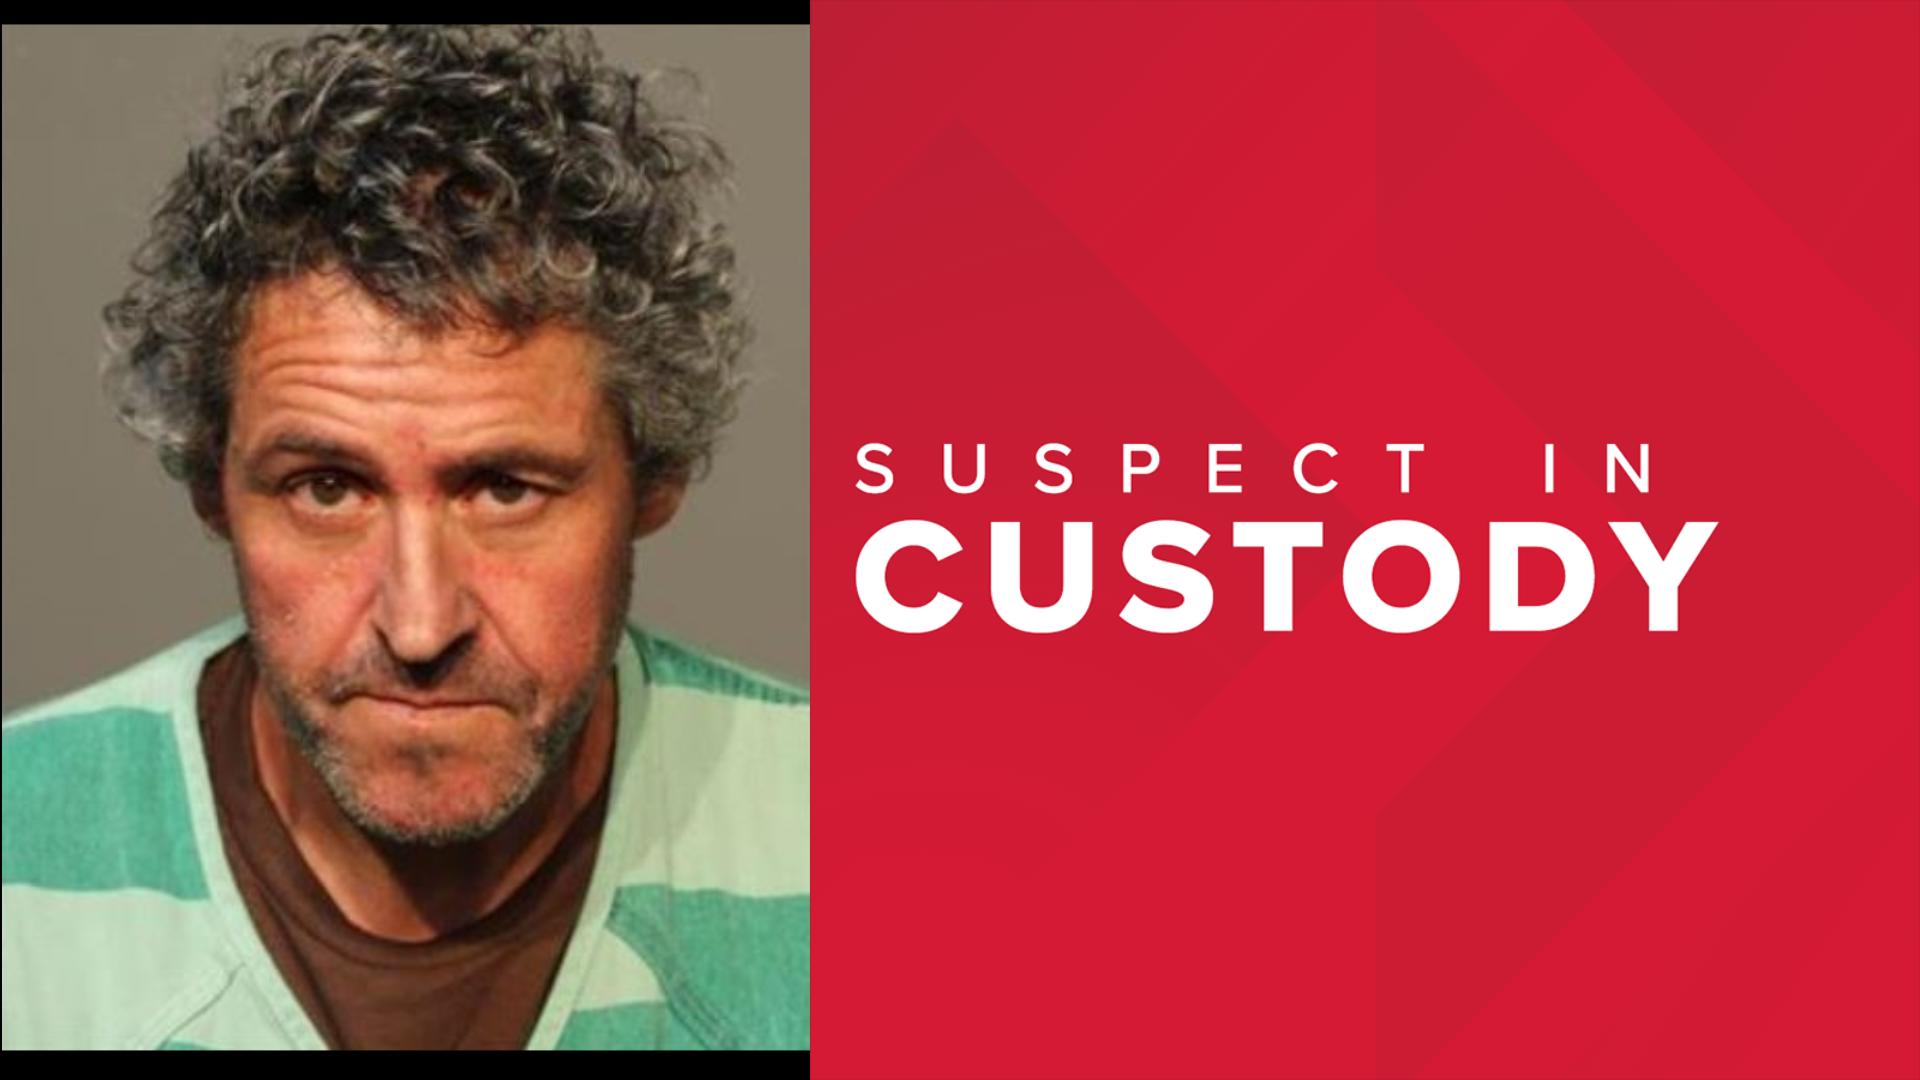 Police have arrested 52-year-old Robert Daniel Gonzales of Des Moines. He is charged with second-degree kidnapping and first-degree burglary.